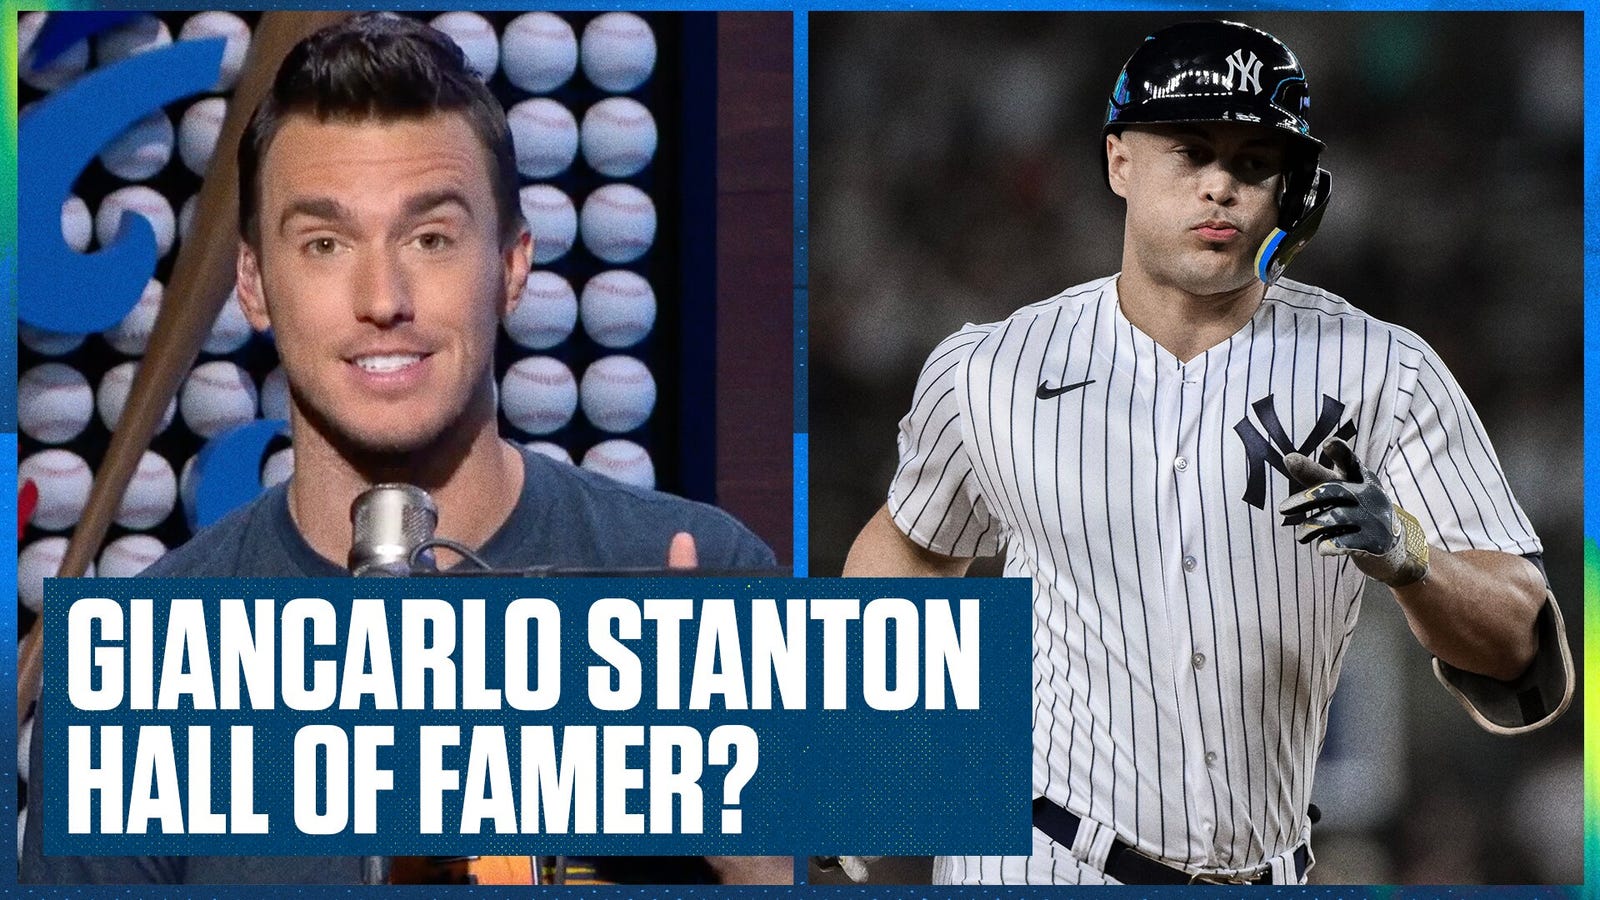 Is New York Yankees' Giancarlo Stanton a Hall of Famer?